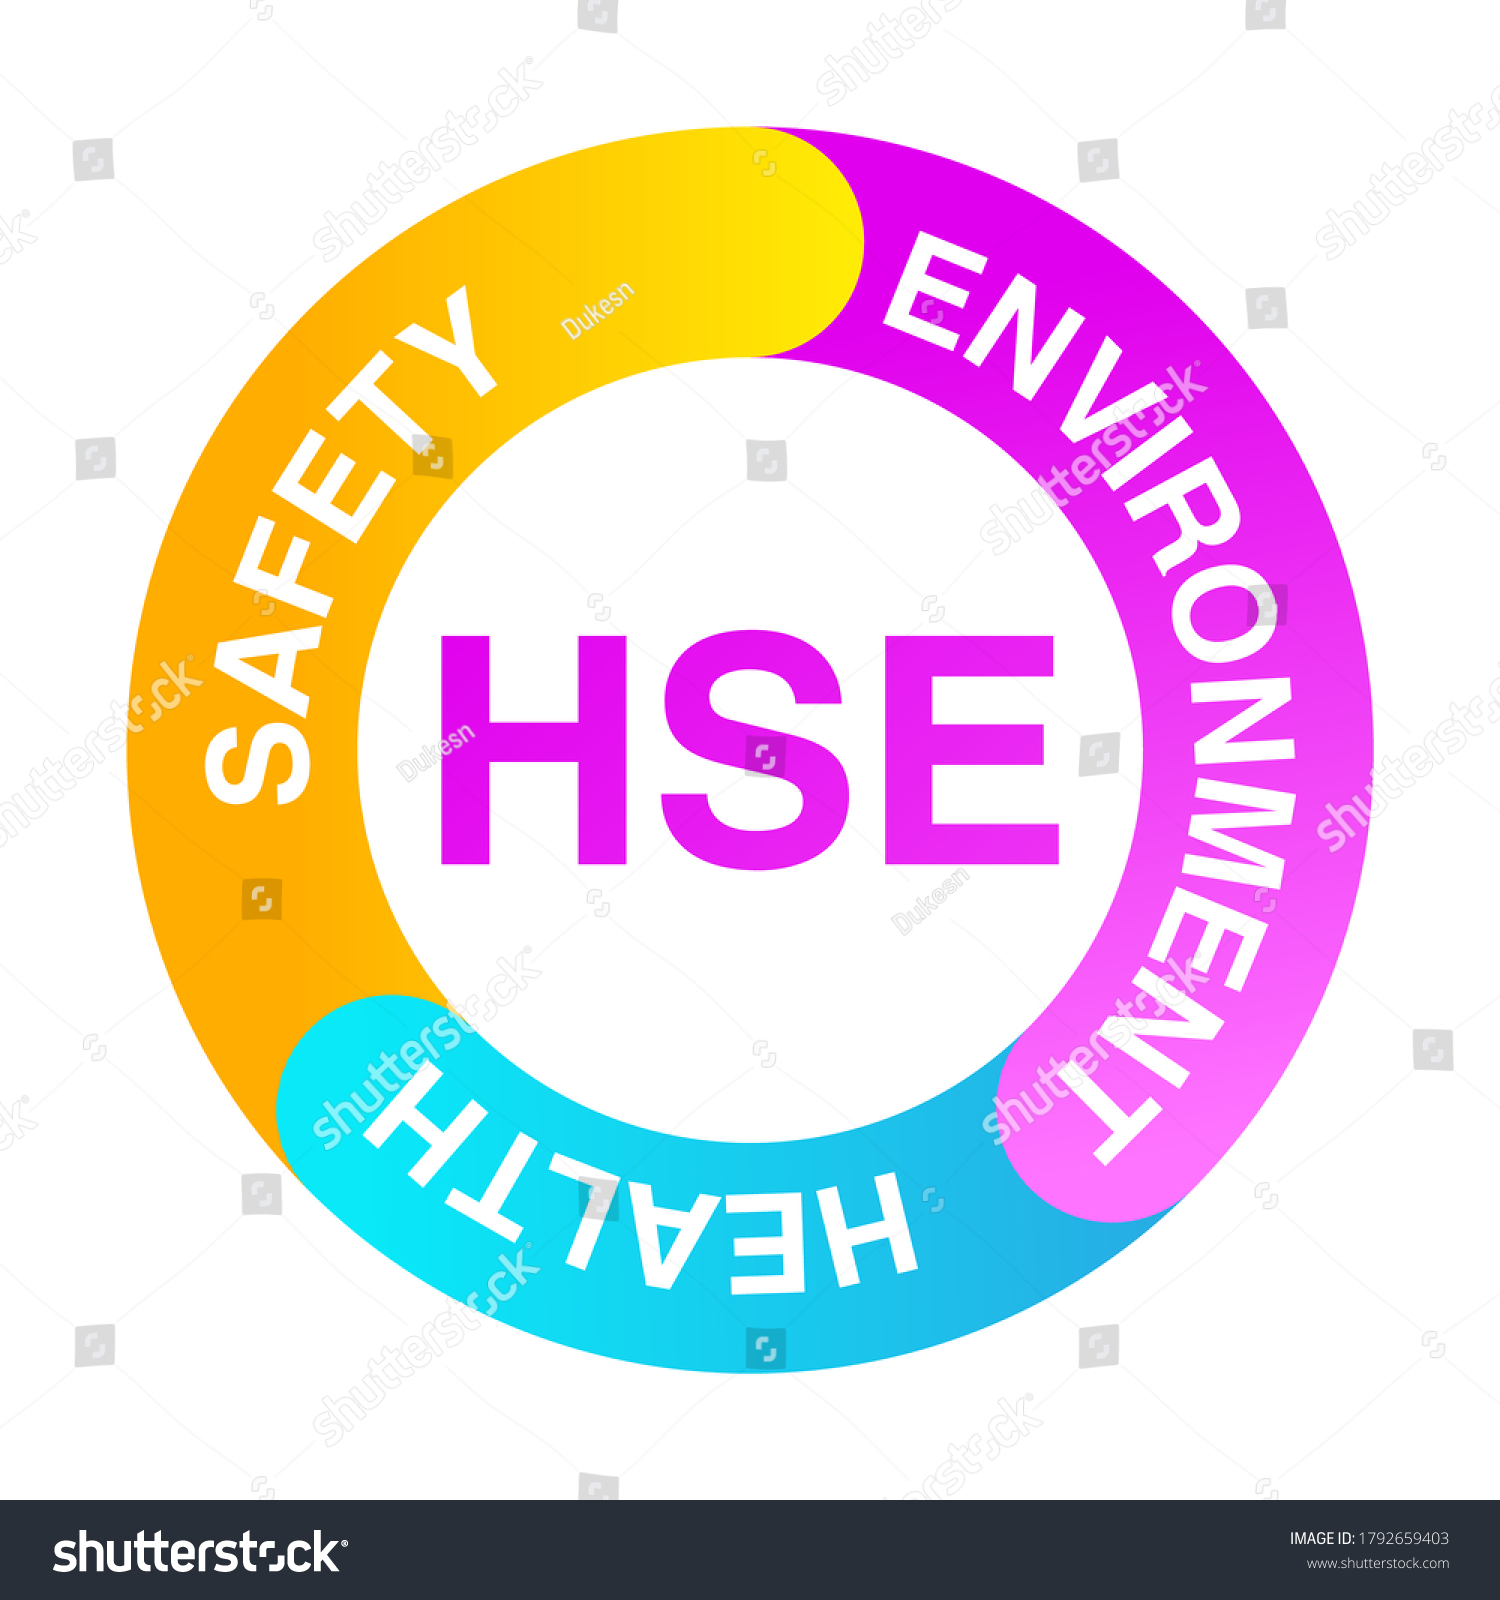 Hse Health Safety Environmenbusiness Logo Icon Stock Vector Royalty Free 1792659403